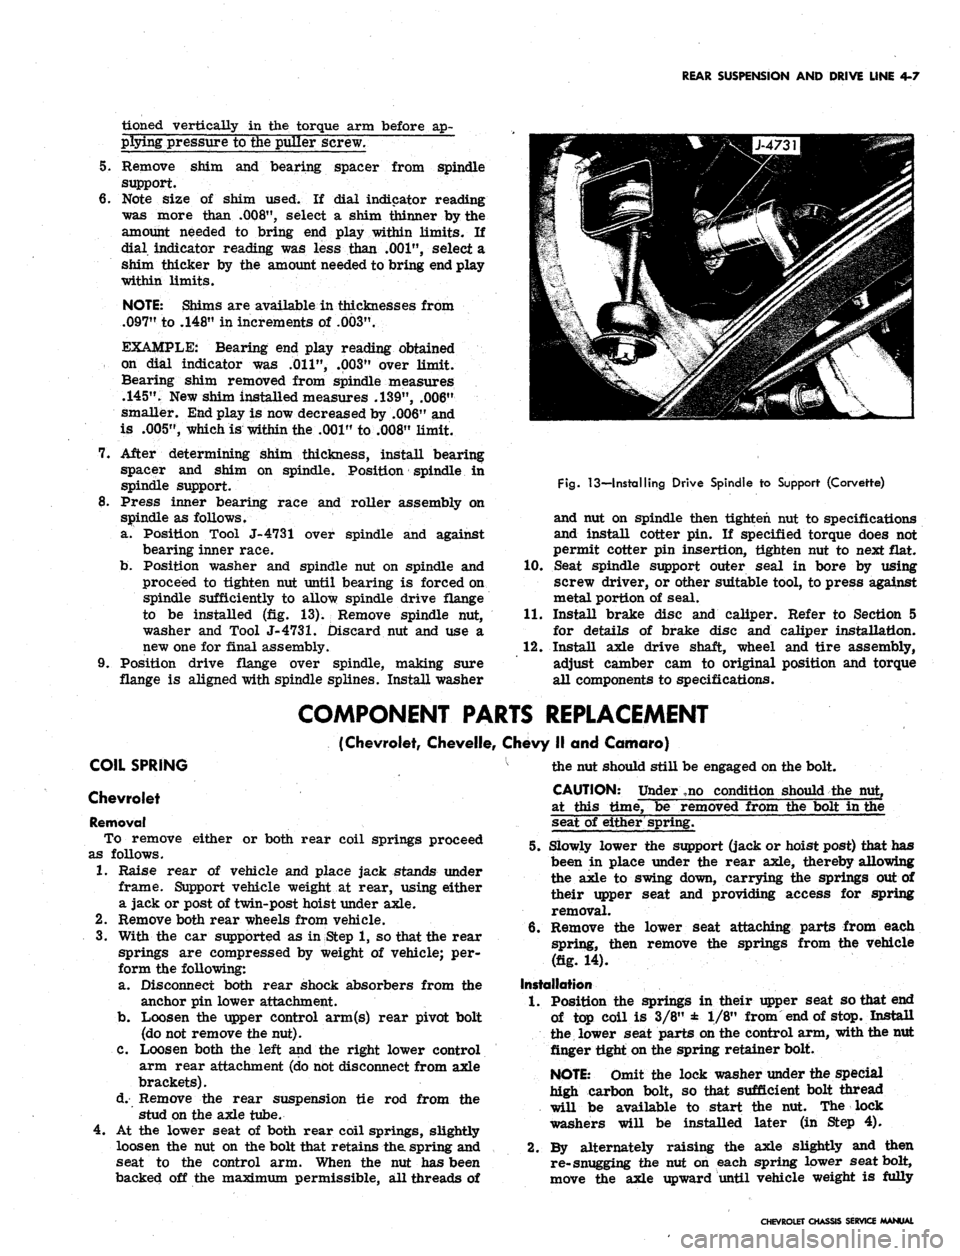 CHEVROLET CAMARO 1967 1.G Chassis Service Manual 
REAR SUSPENSION AND DRIVE LINE 4-7

tioned vertically in the torque arm before ap-

plying pressure to the puller screw.

5.
 Remove shim and bearing spacer from spindle

support.

6. Note size of sh